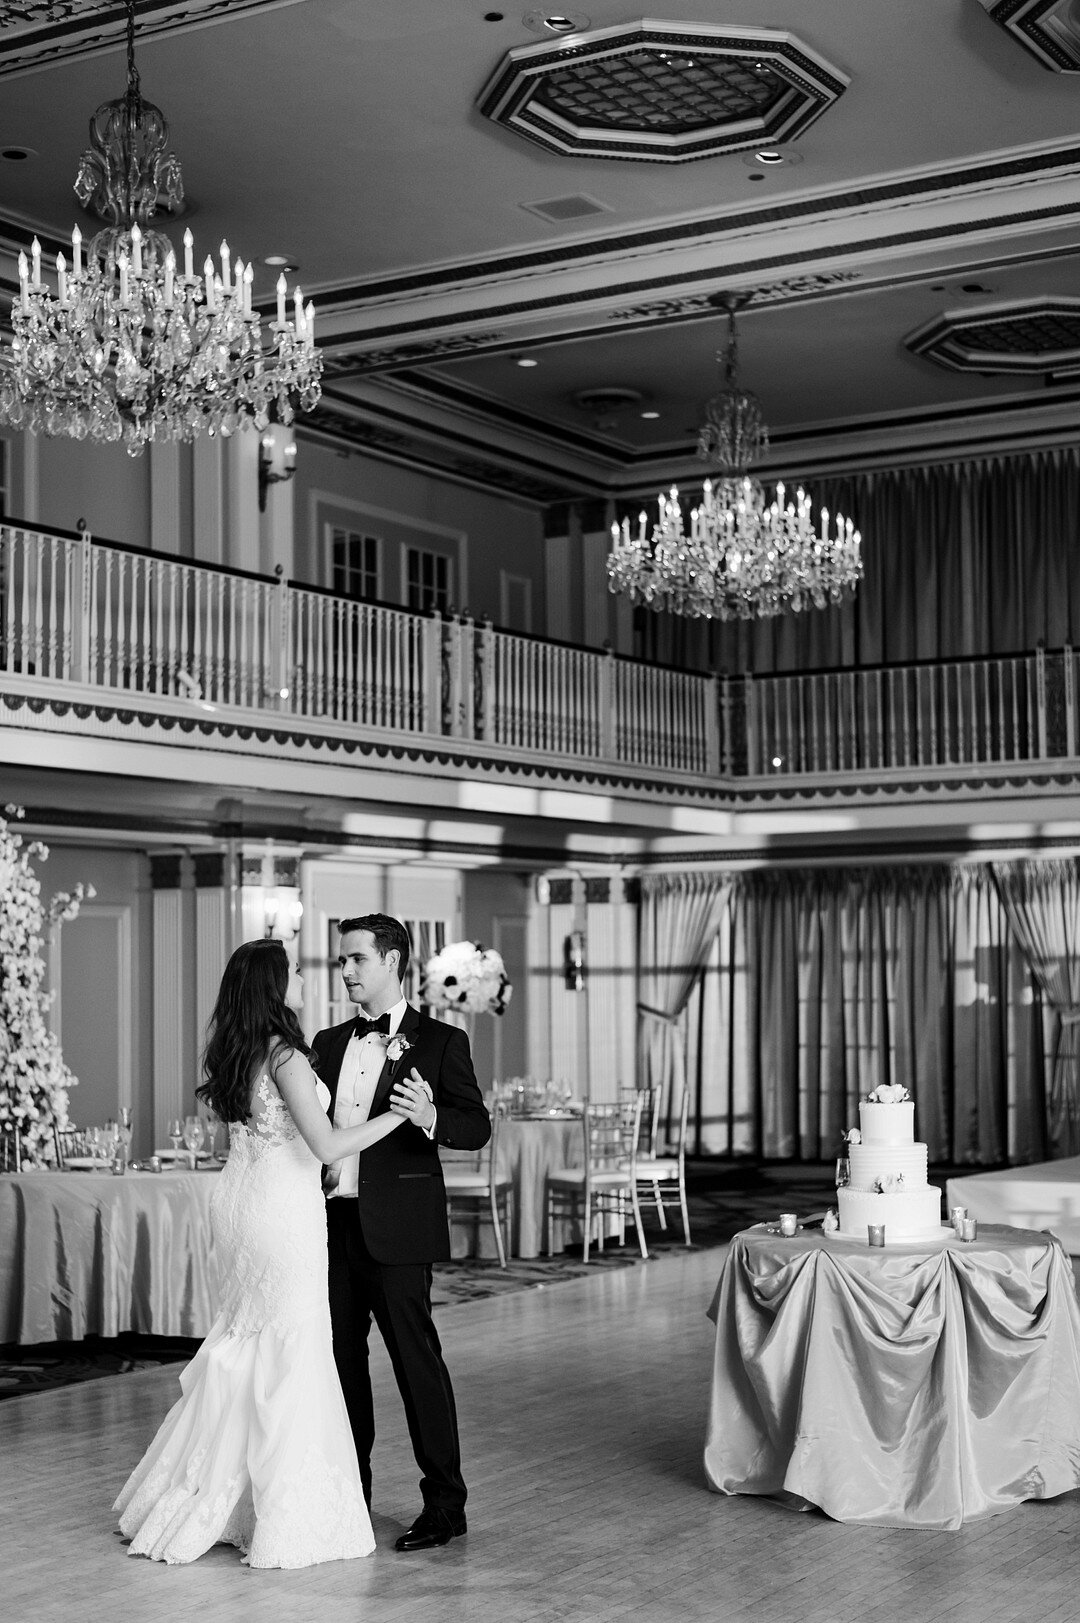 Classic and Romantic Chicago Wedding at The Drake Hotel captured by Julia Franzosa Photography. See wedding planning ideas at CHItheeWED.com!